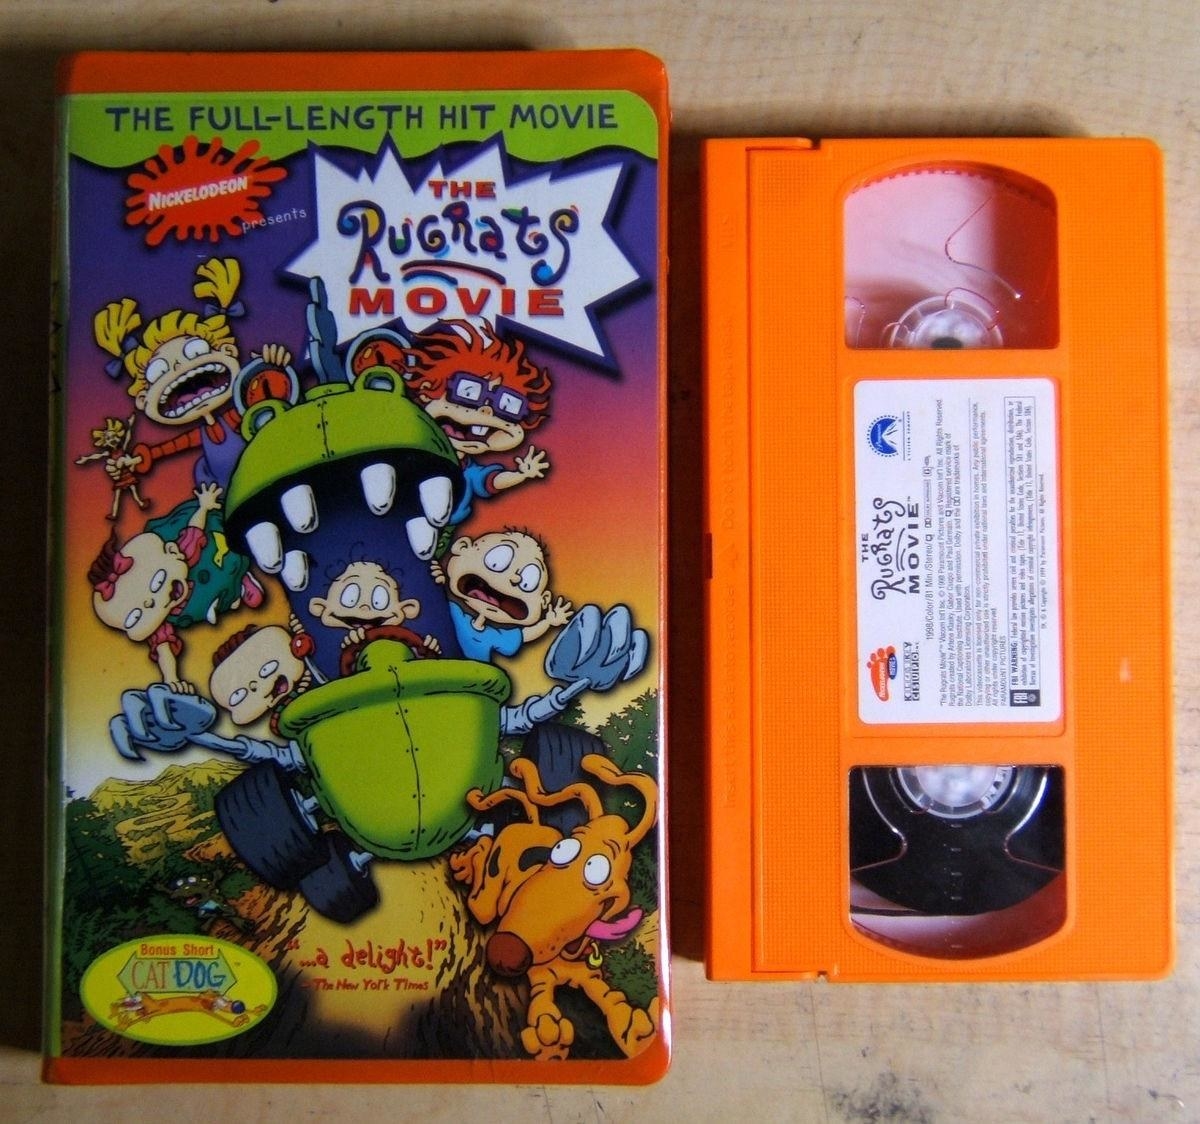 An orange VHS tape of the Rugrats movie next to its clamshell case